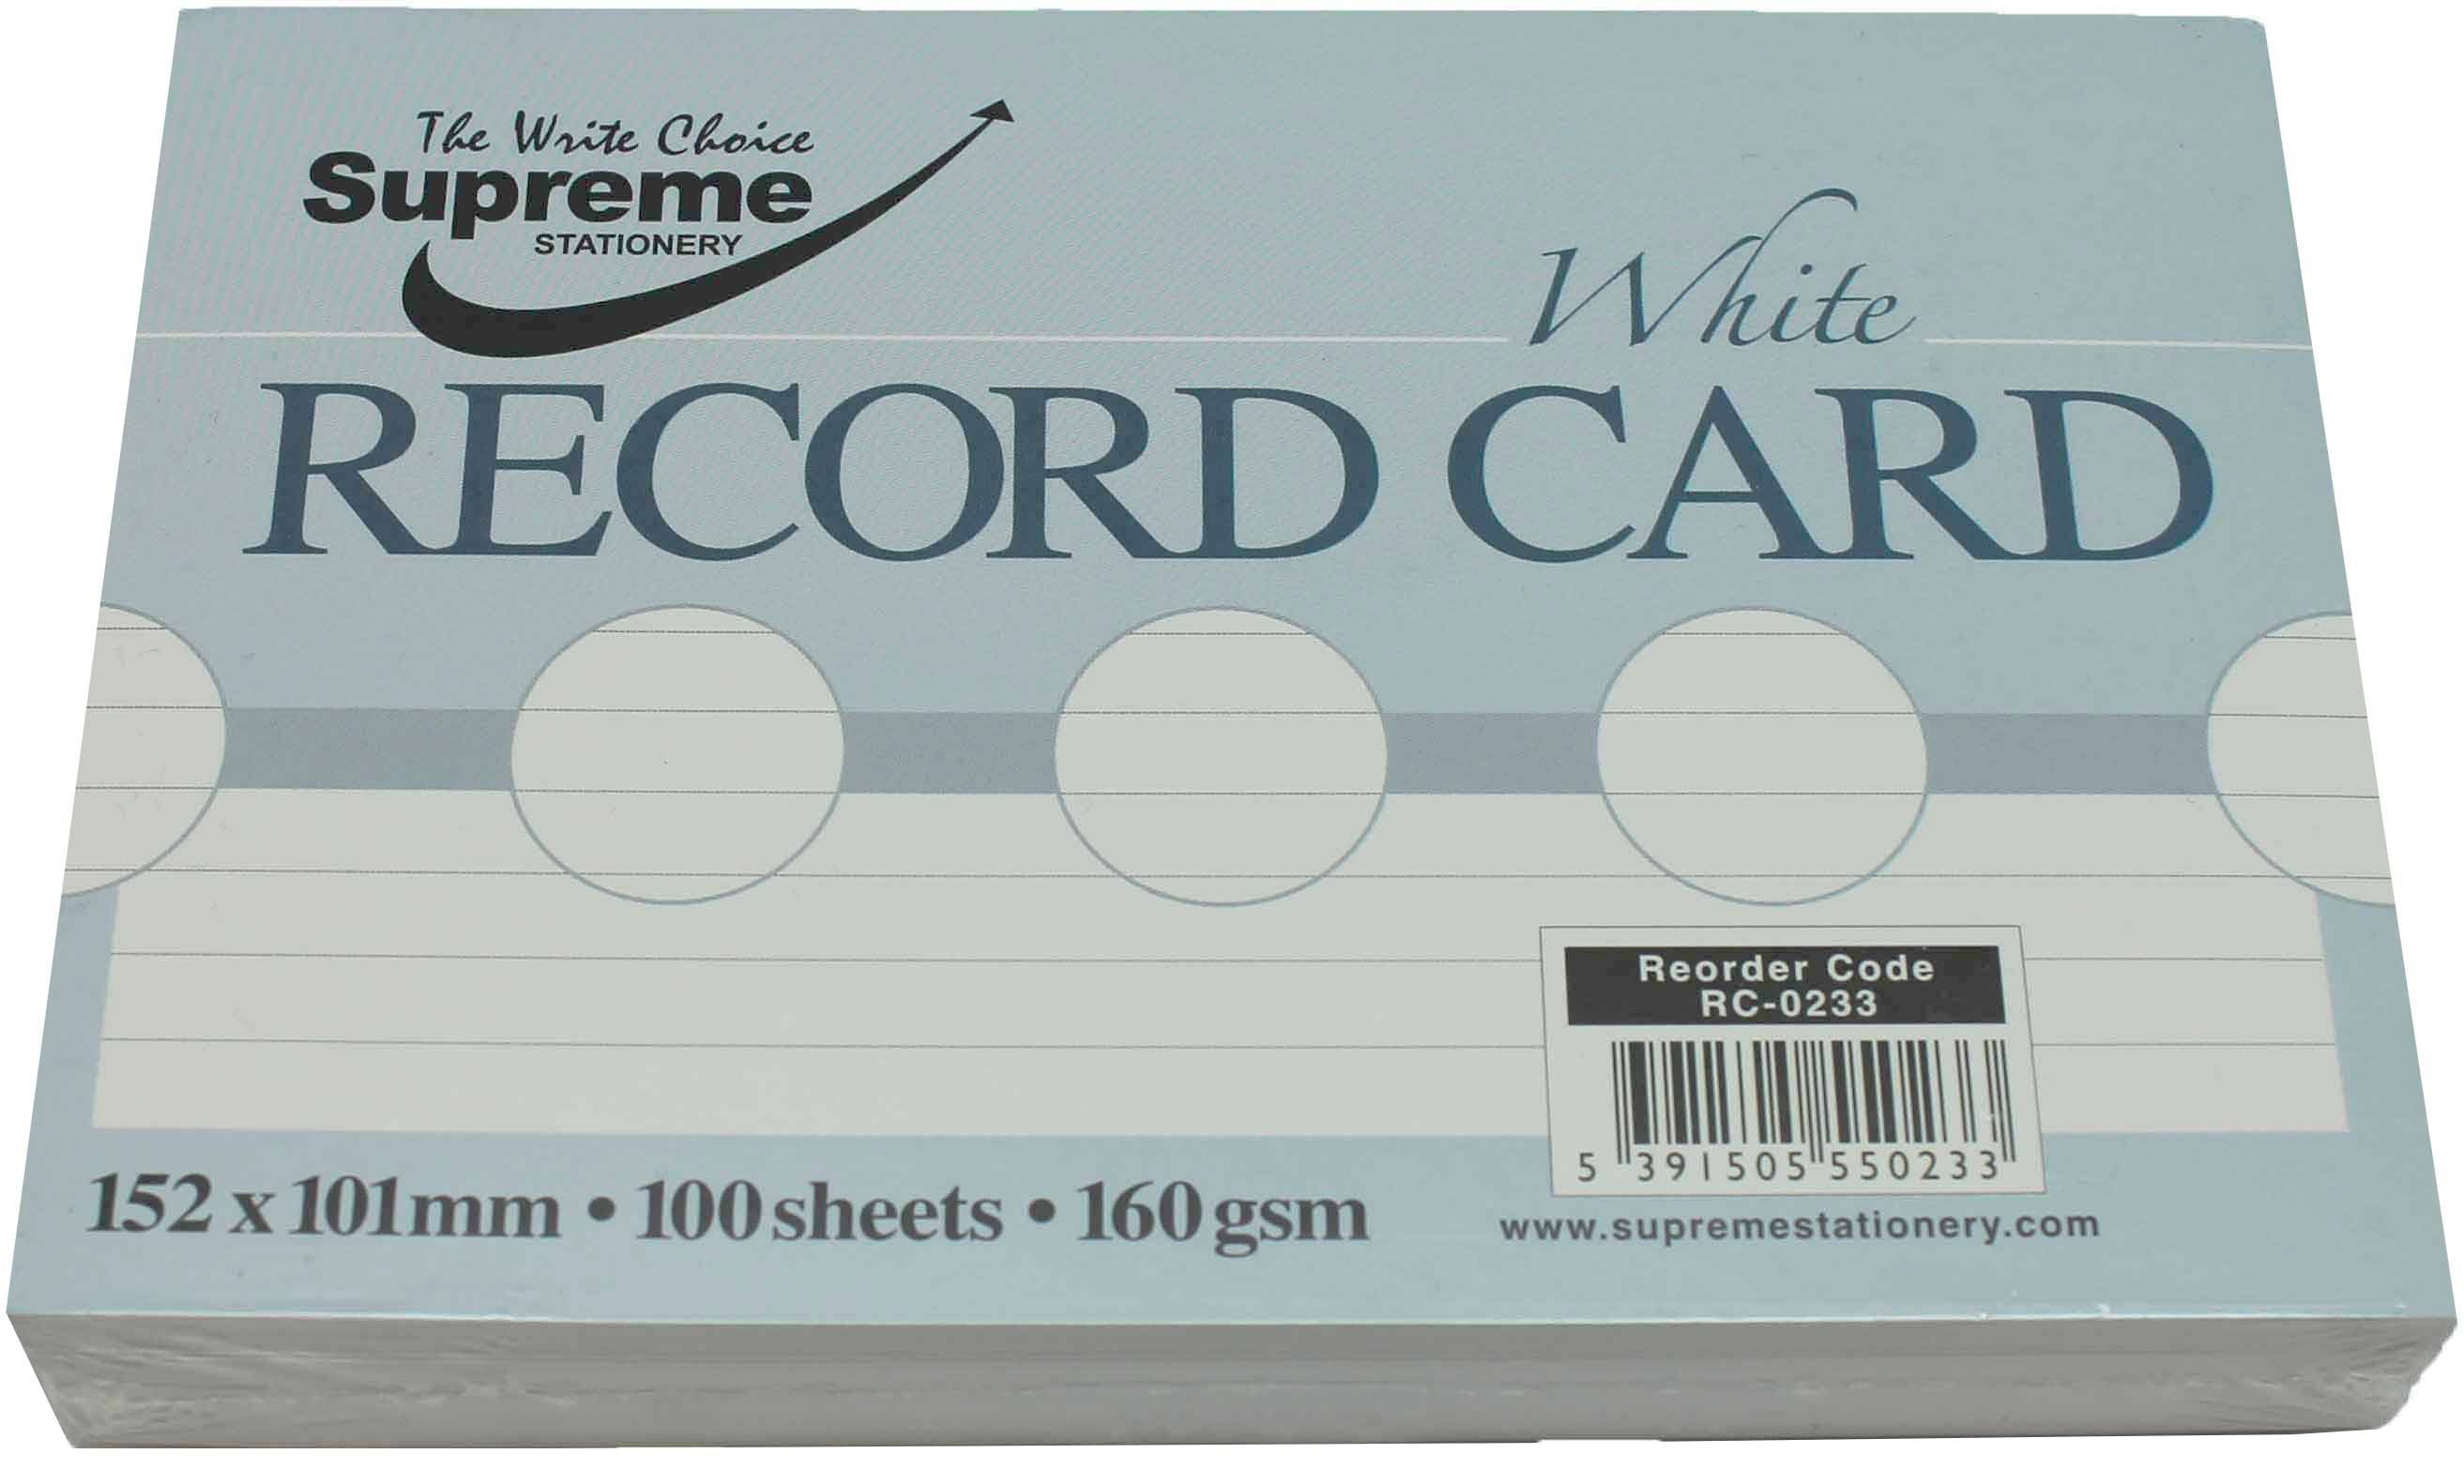 Supreme Ruled Record Cards - White, 100 Pack